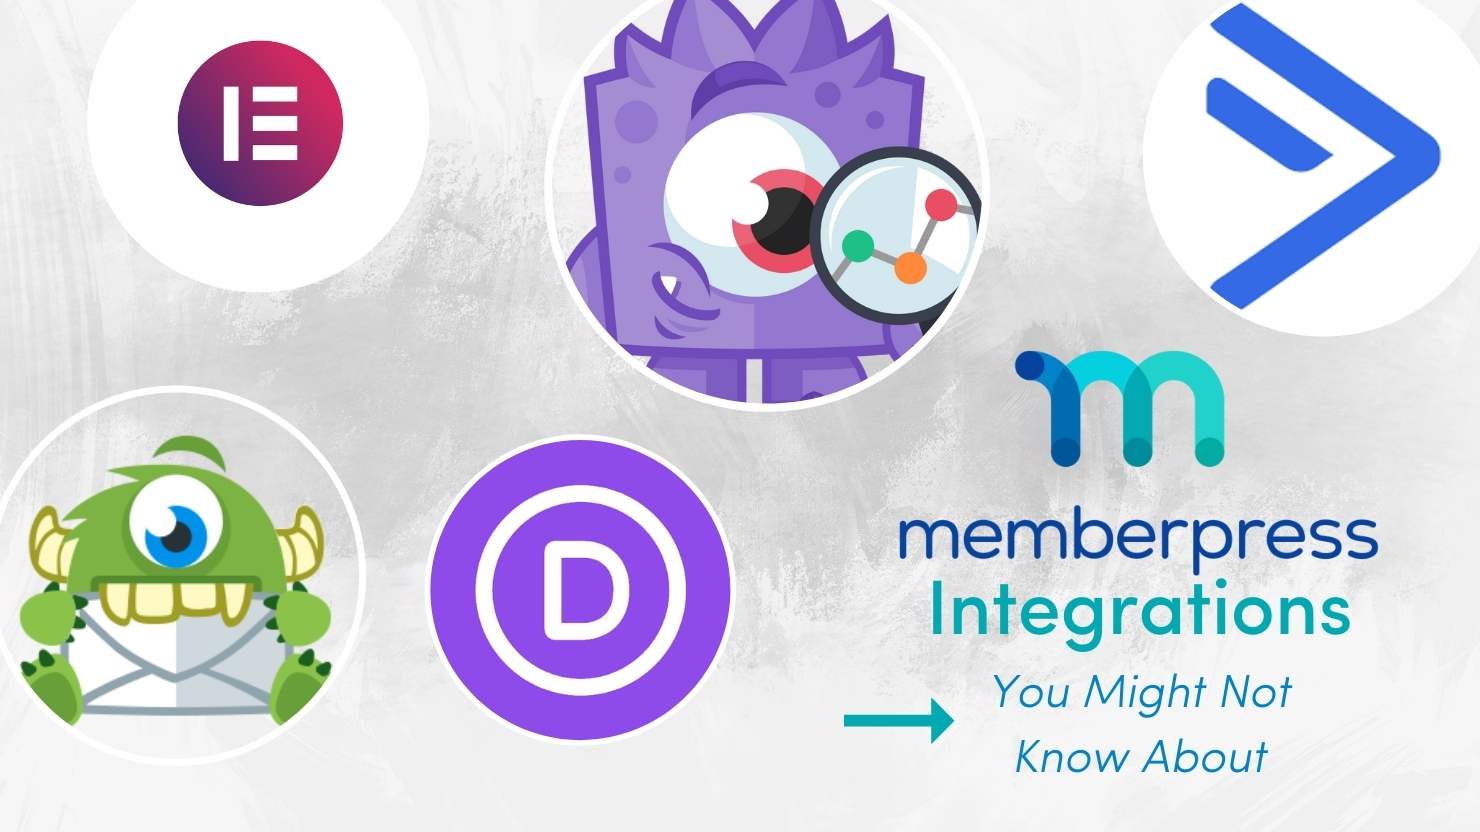 MemberPress integrations you might not know about